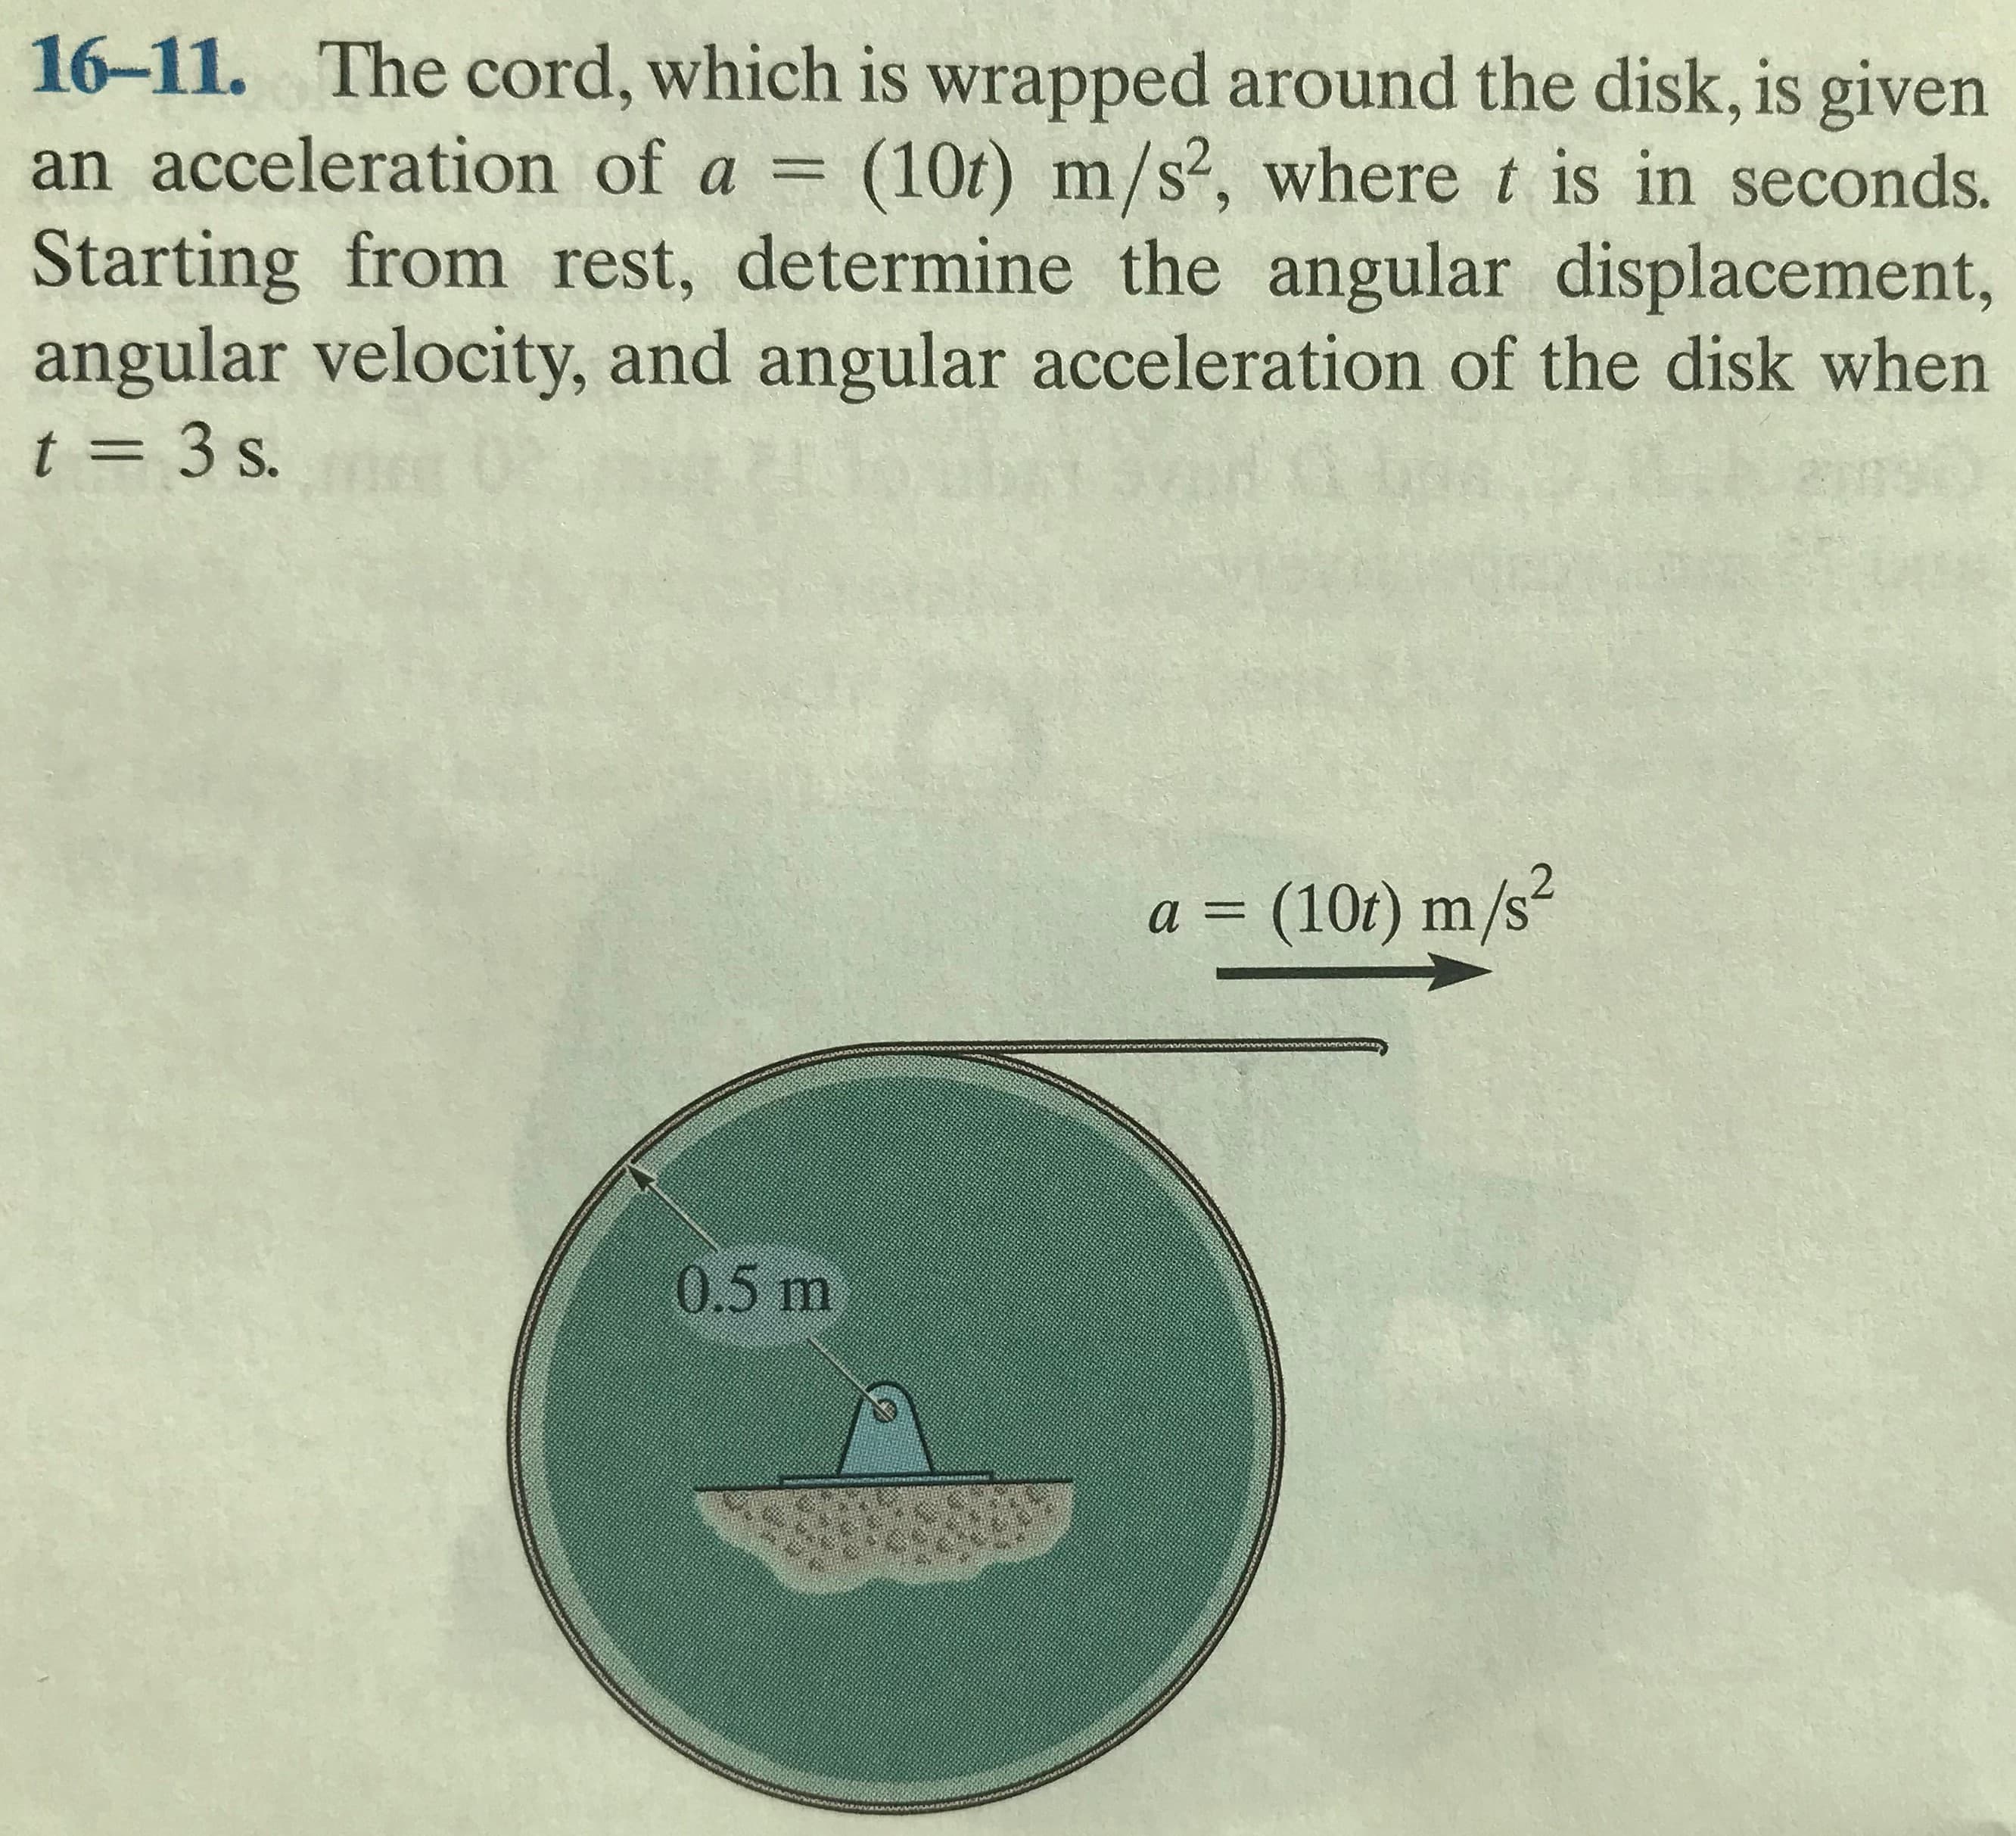 16-11. The cord, which is wrapped around the disk, is given
an acceleration of a = (10t) m/s2, where t is in seconds.
Starting from rest, determine the angular displacement,
angular velocity, and angular acceleration of the disk when
t = 3 s.
a = (10t) m/s²
0.5 m
